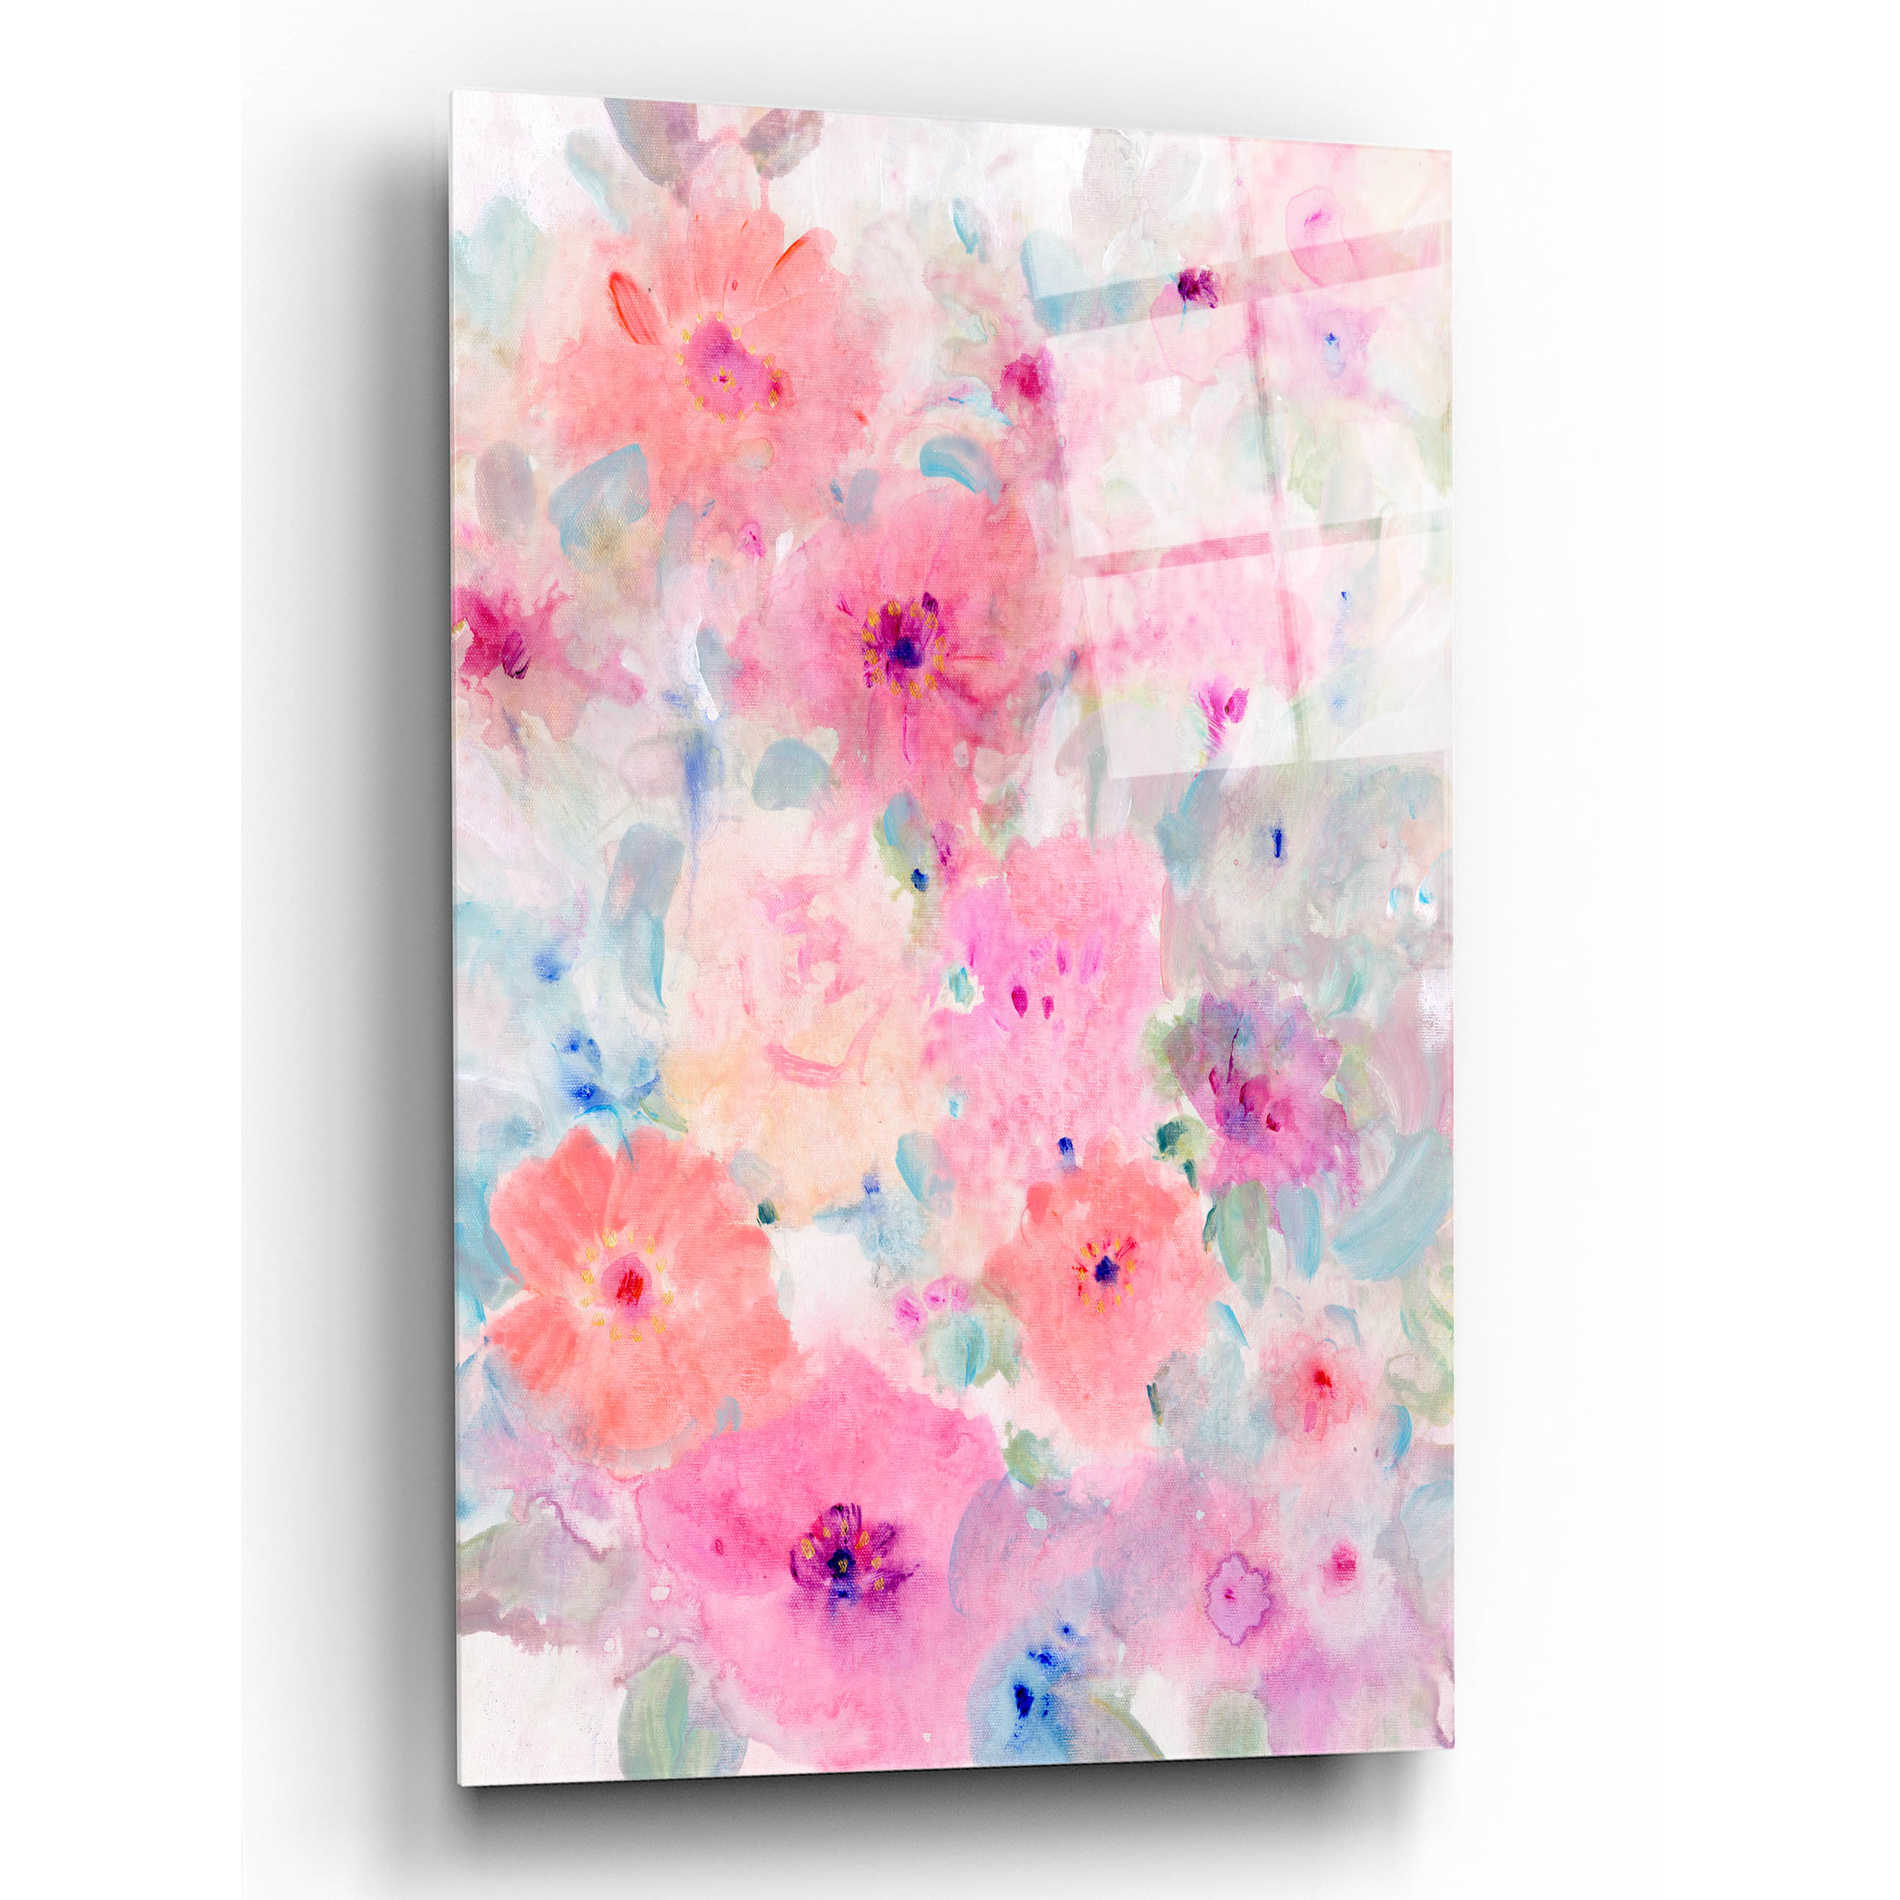 Epic Art 'Bright Floral Design  I' by Tim O'Toole, Acrylic Glass Wall Art